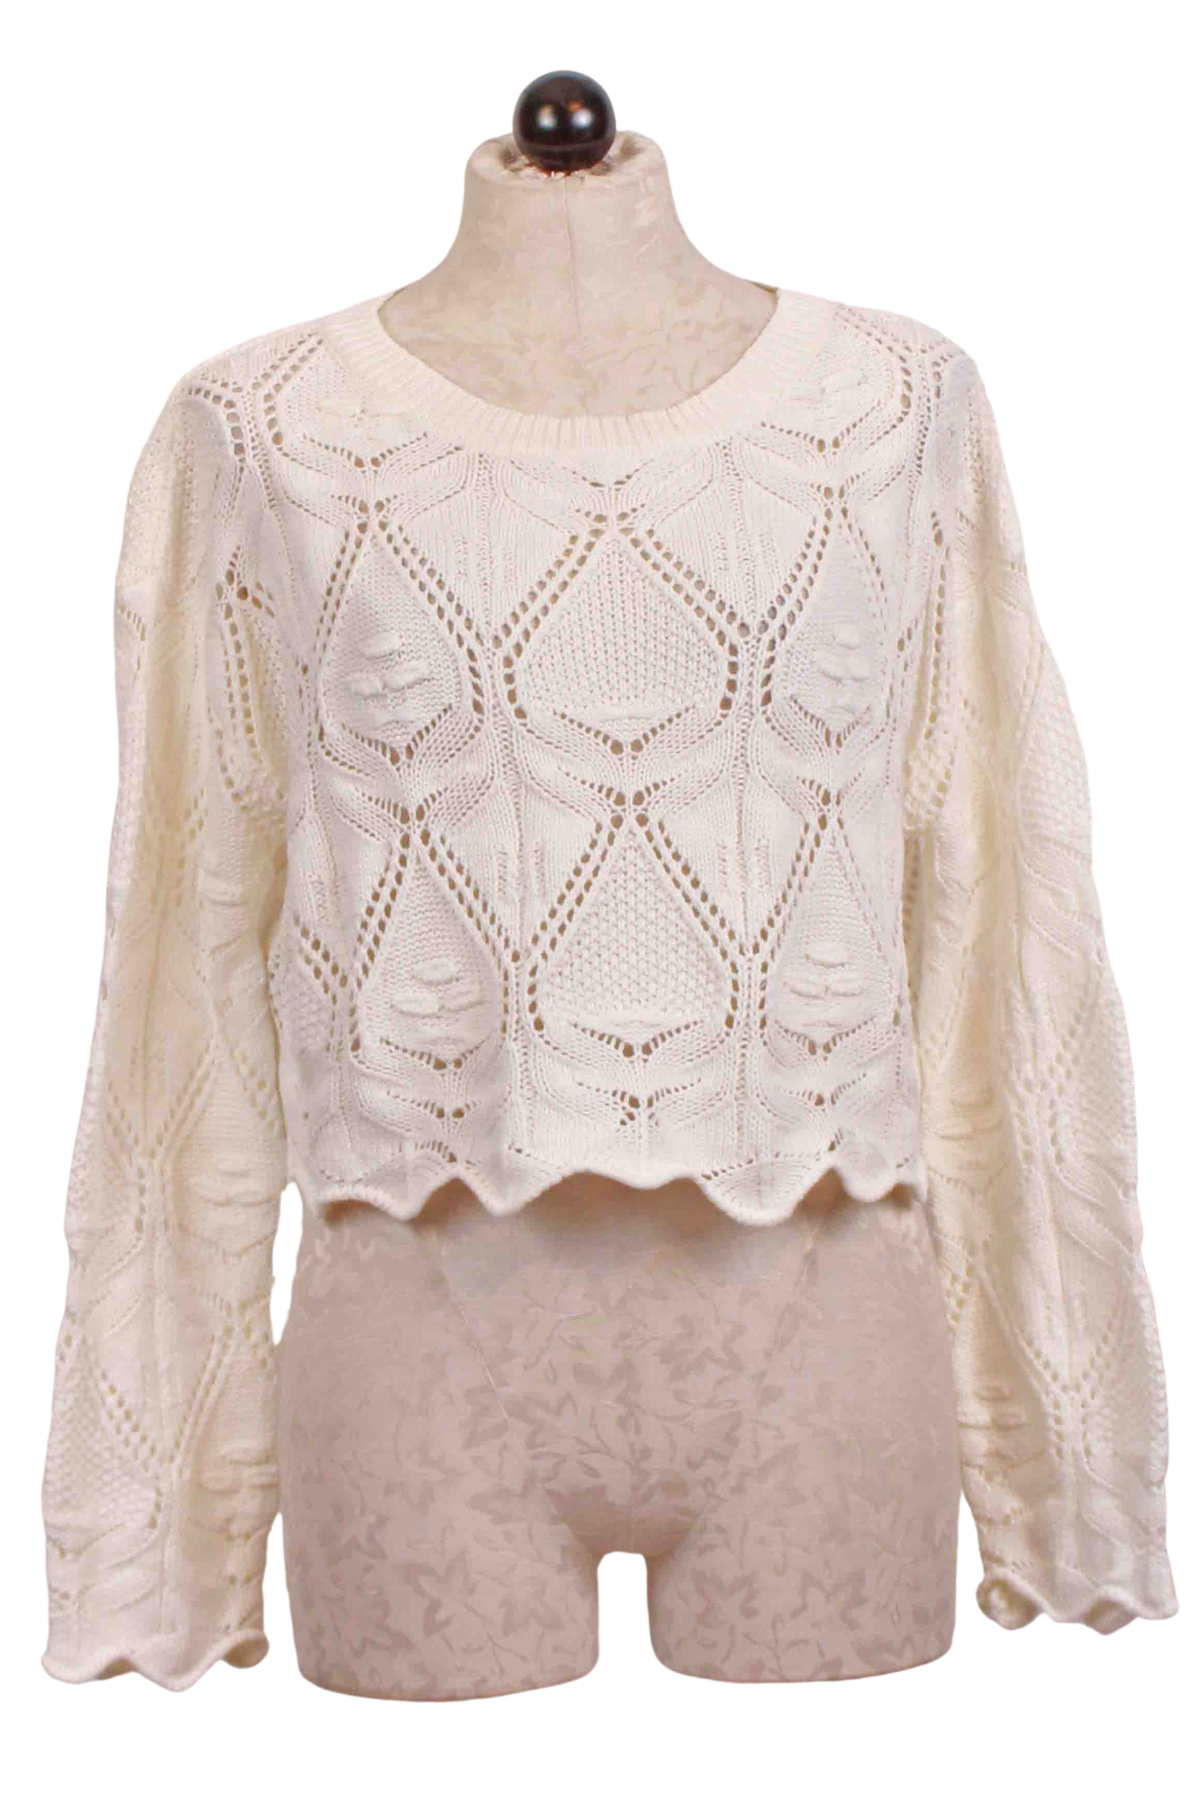 off white Scalloped Hem Pointelle Cropped Sweater by Apricot